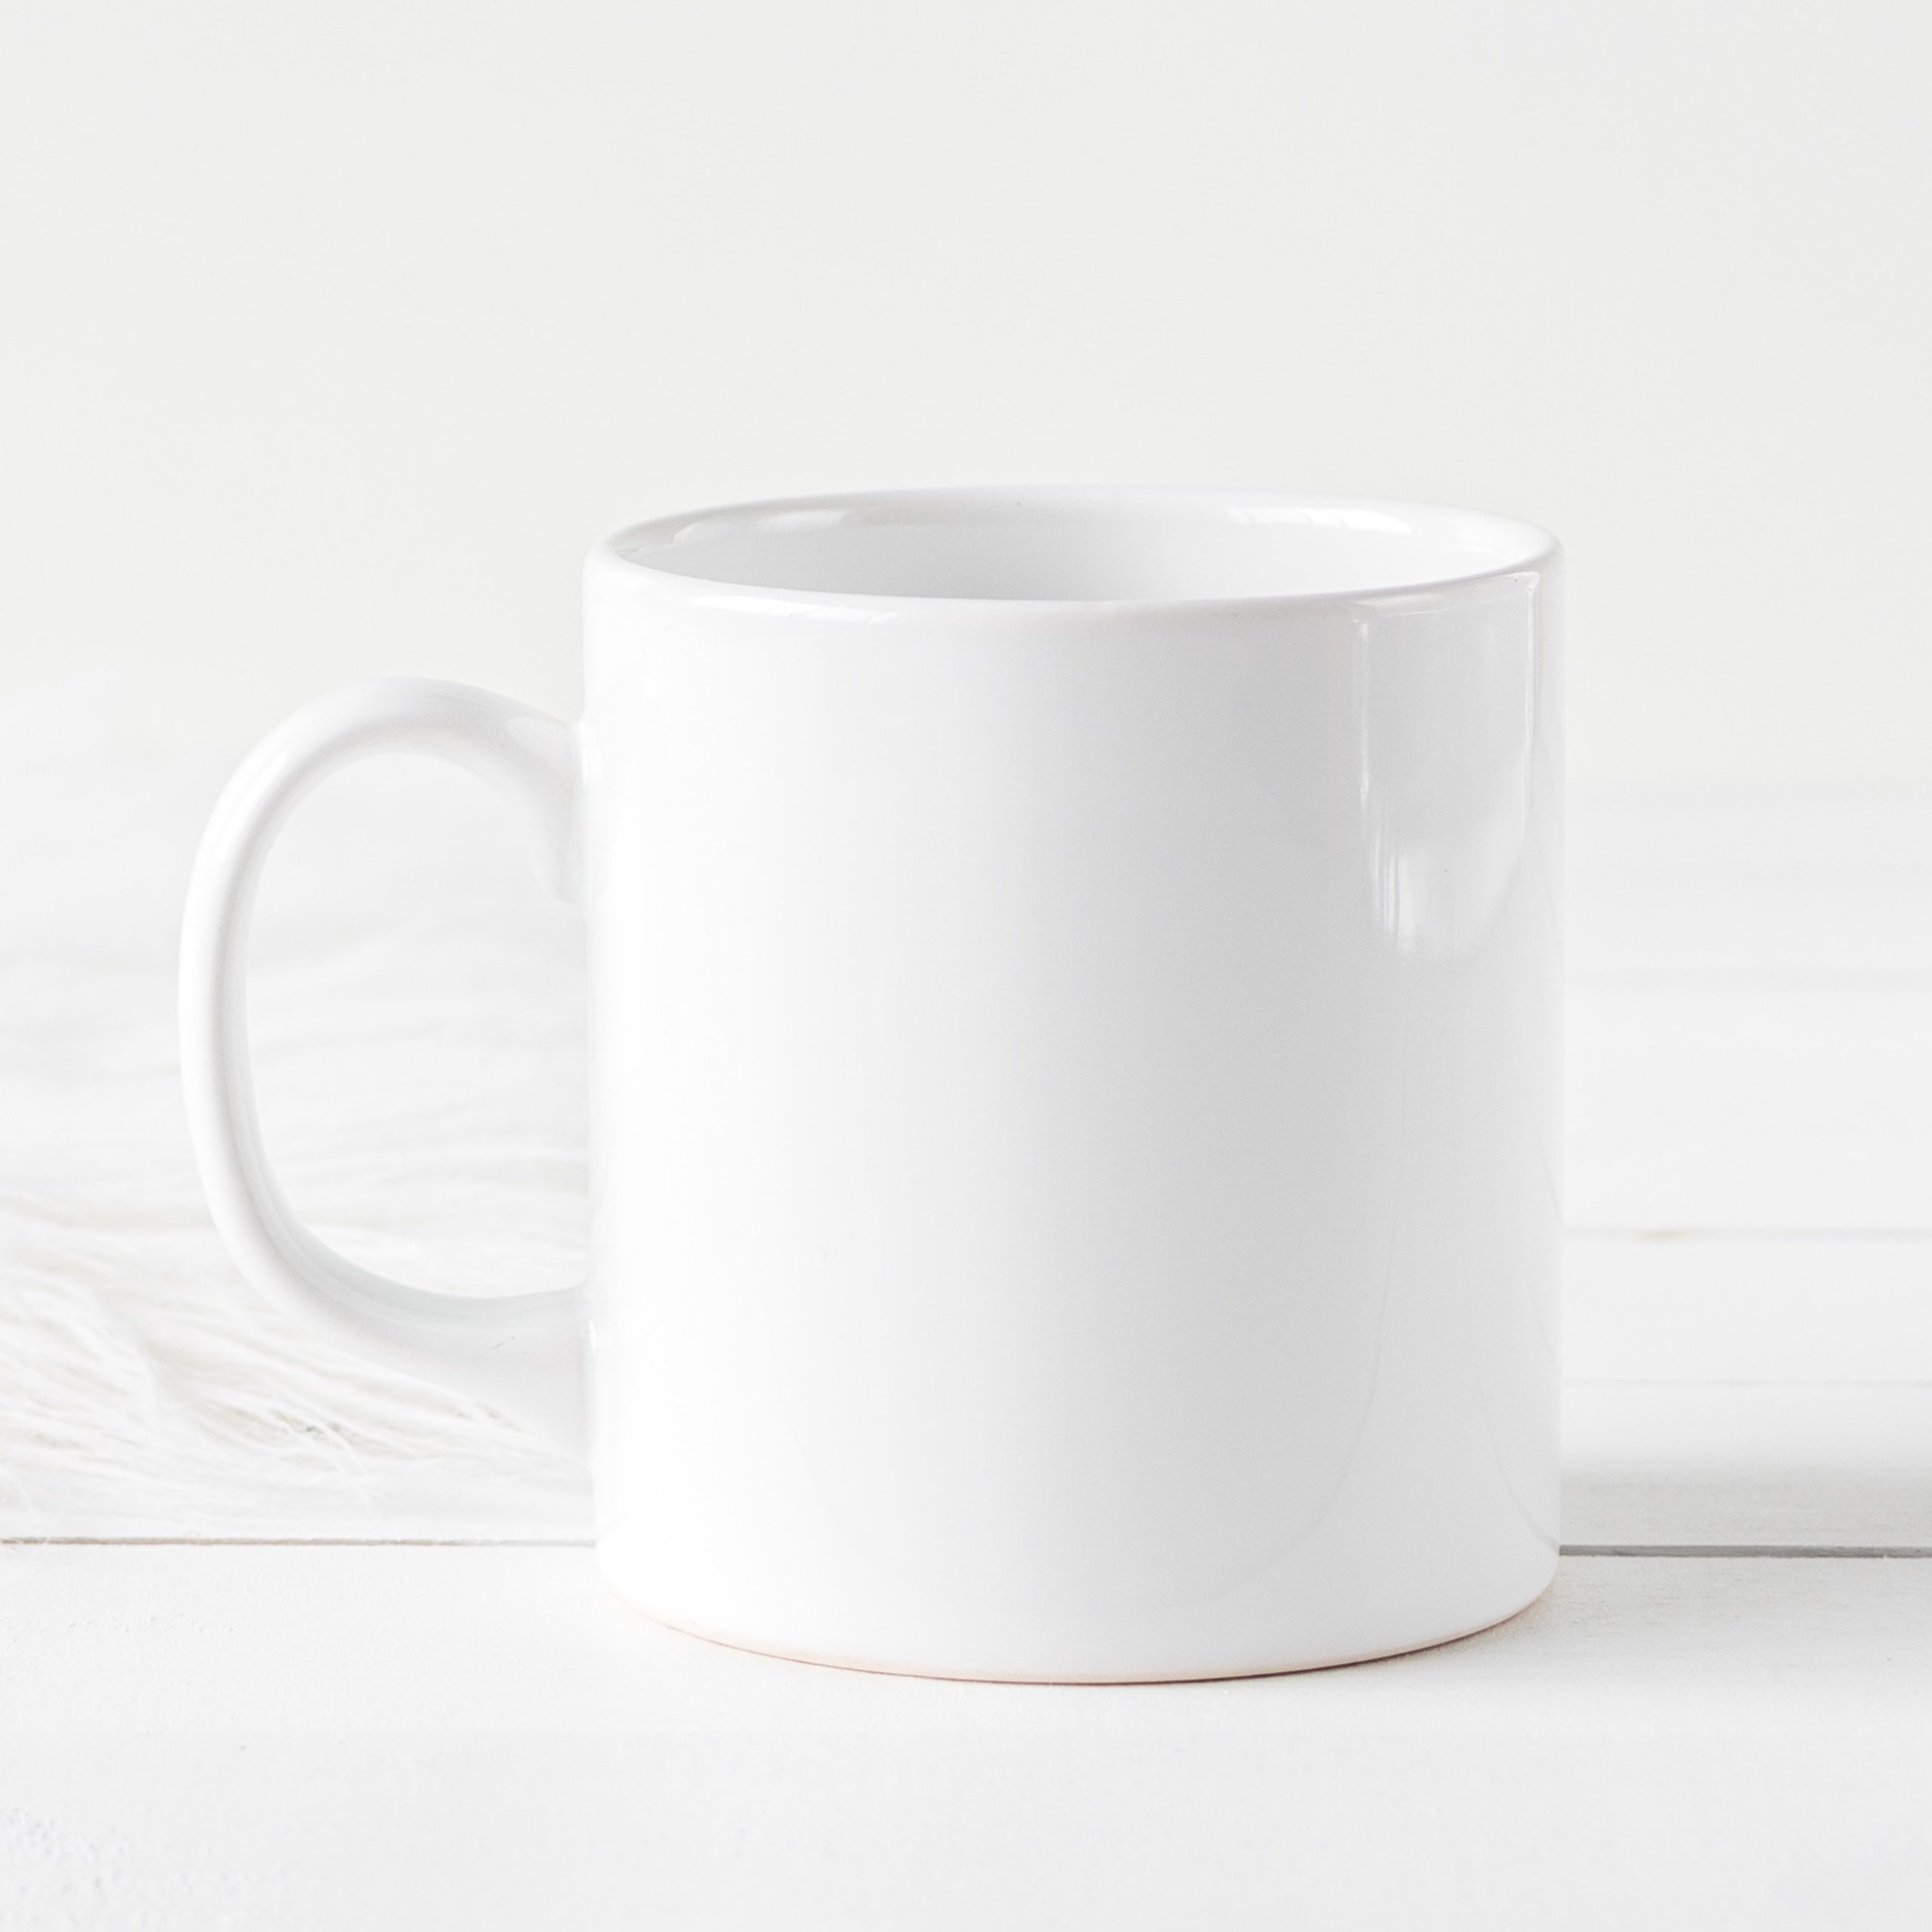 Personalise your own mug - Crafty Badger